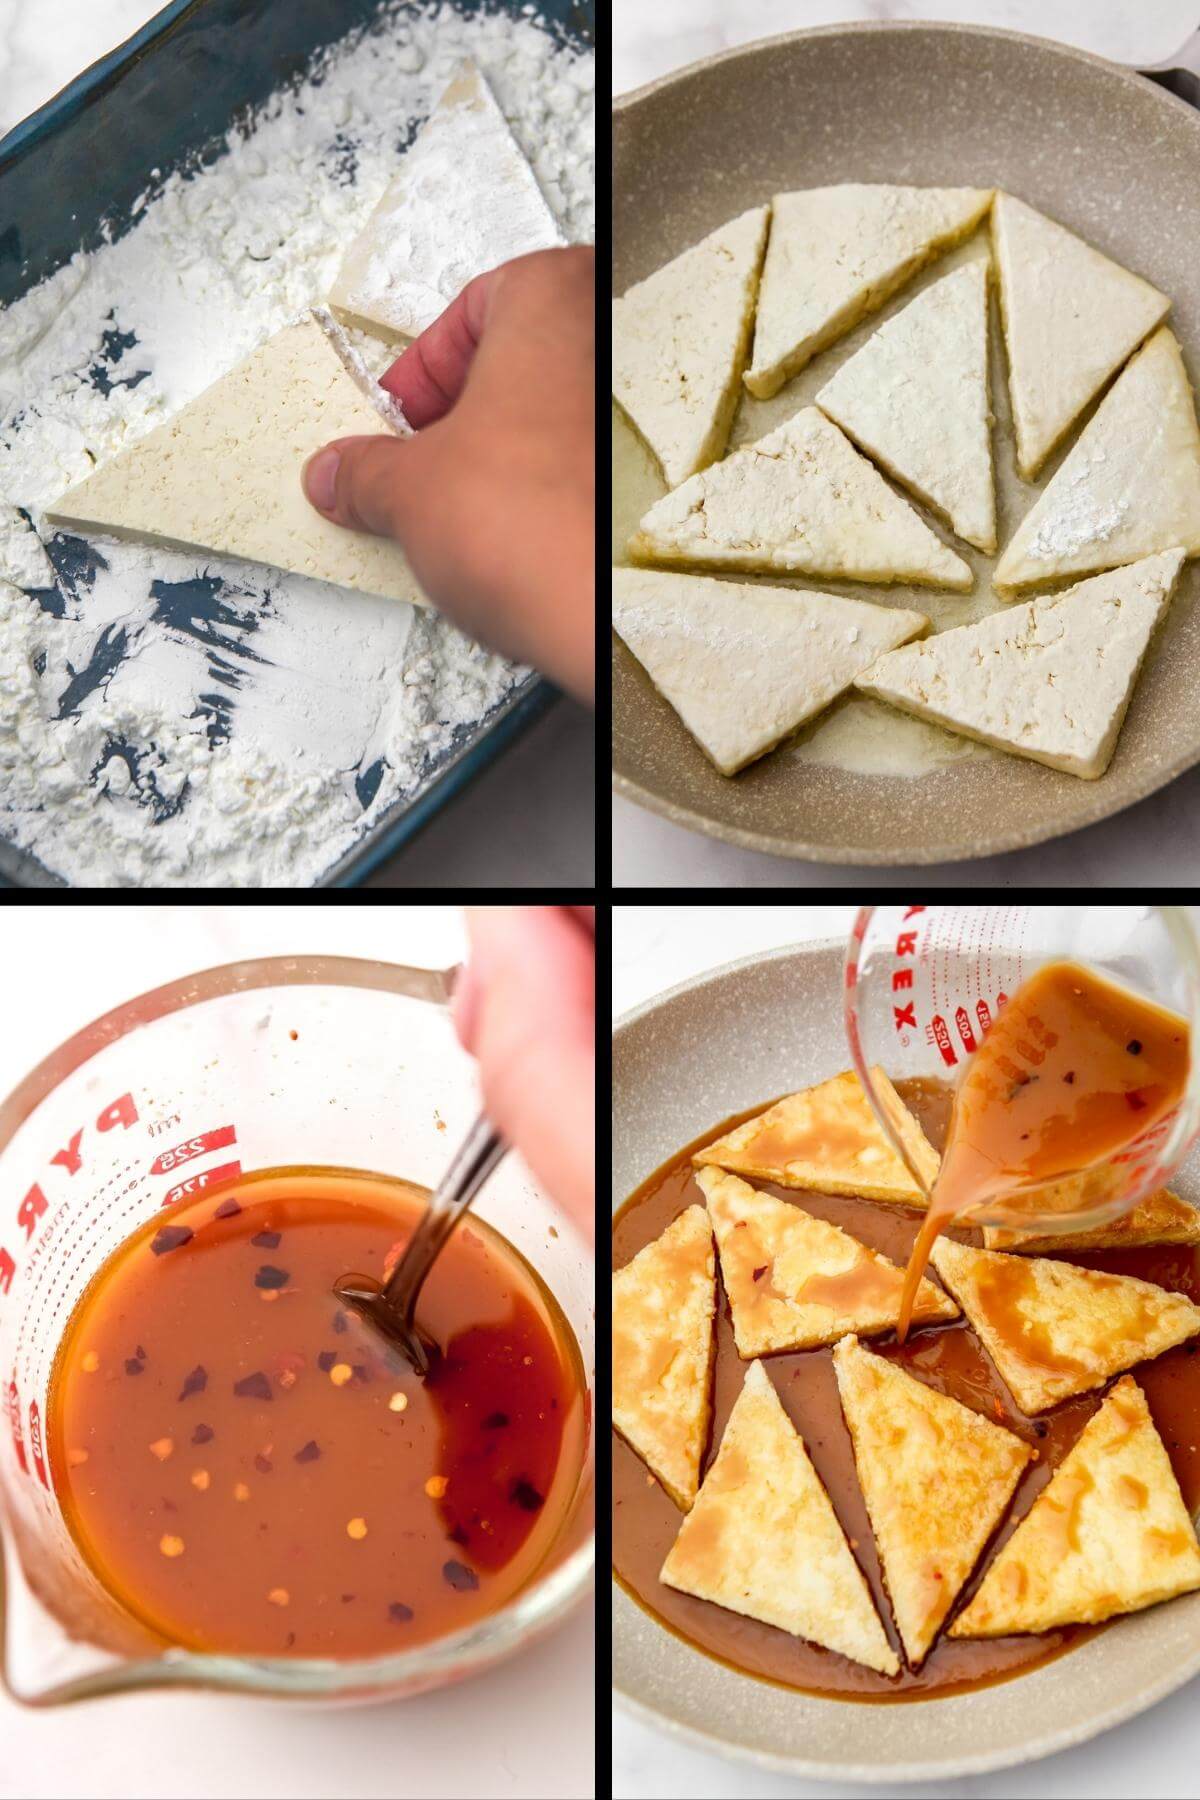 A collage of 4 images showing how to coat tofu in cornstarch, fry it in a pan, then cover it in sticky sauce.